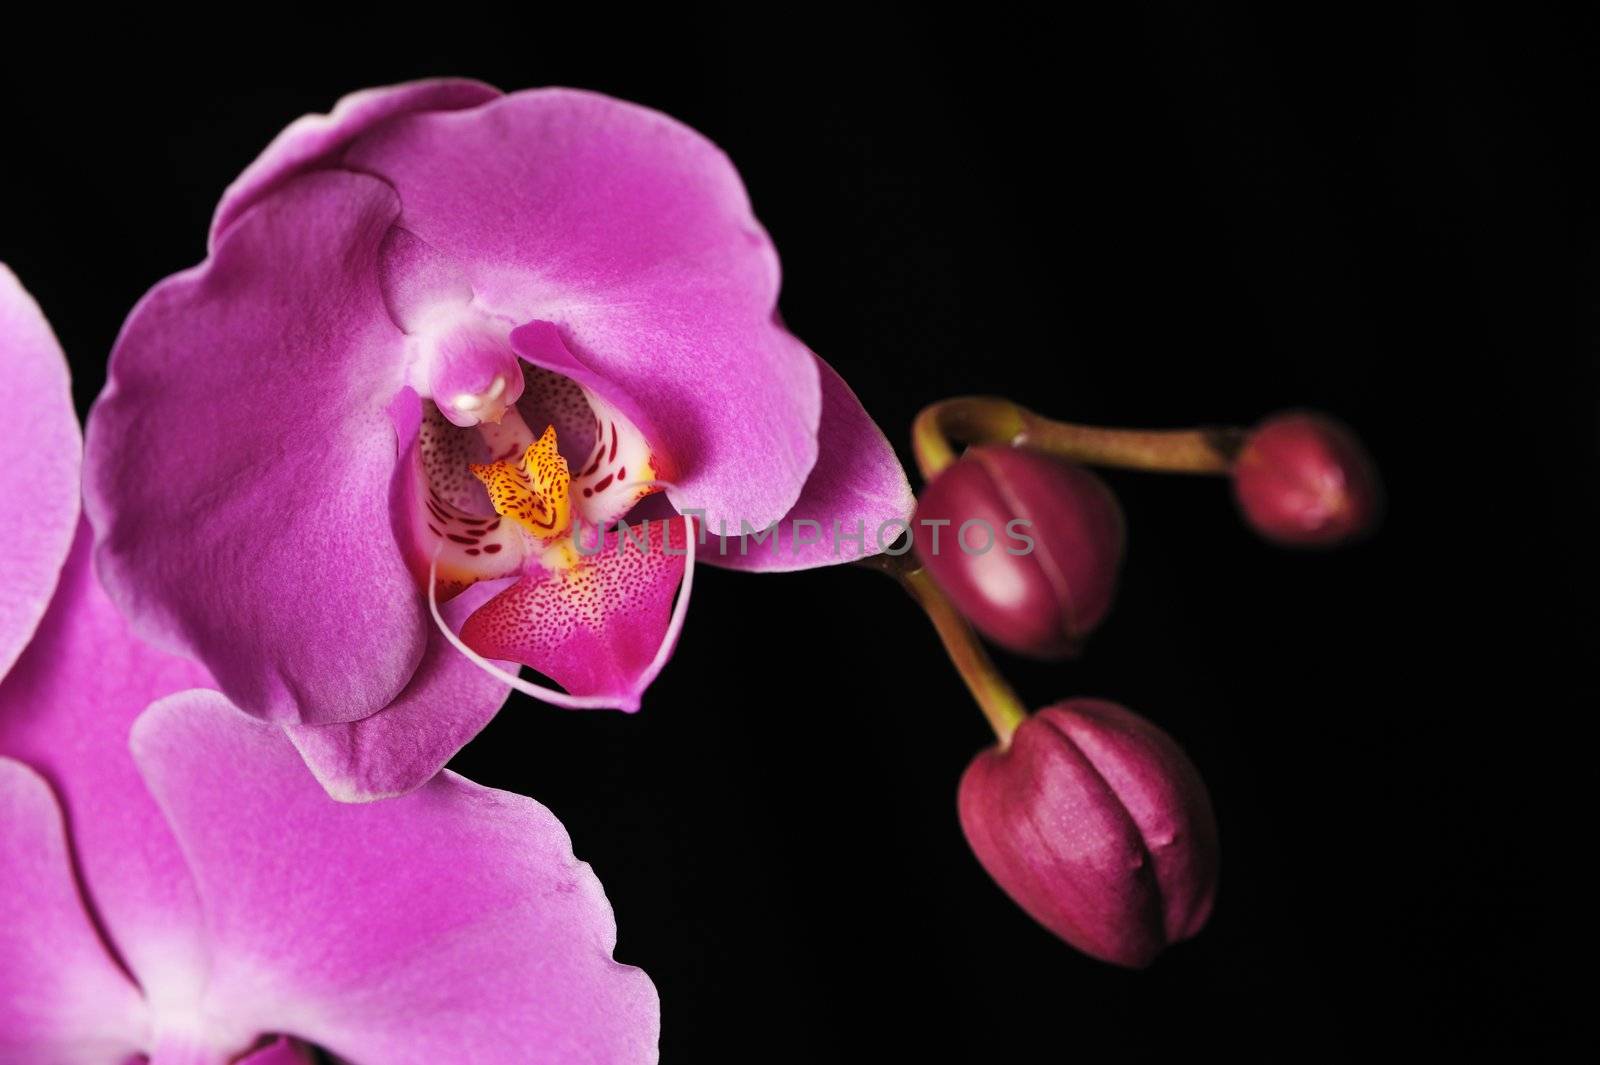 Pink Orchid Isolated on black